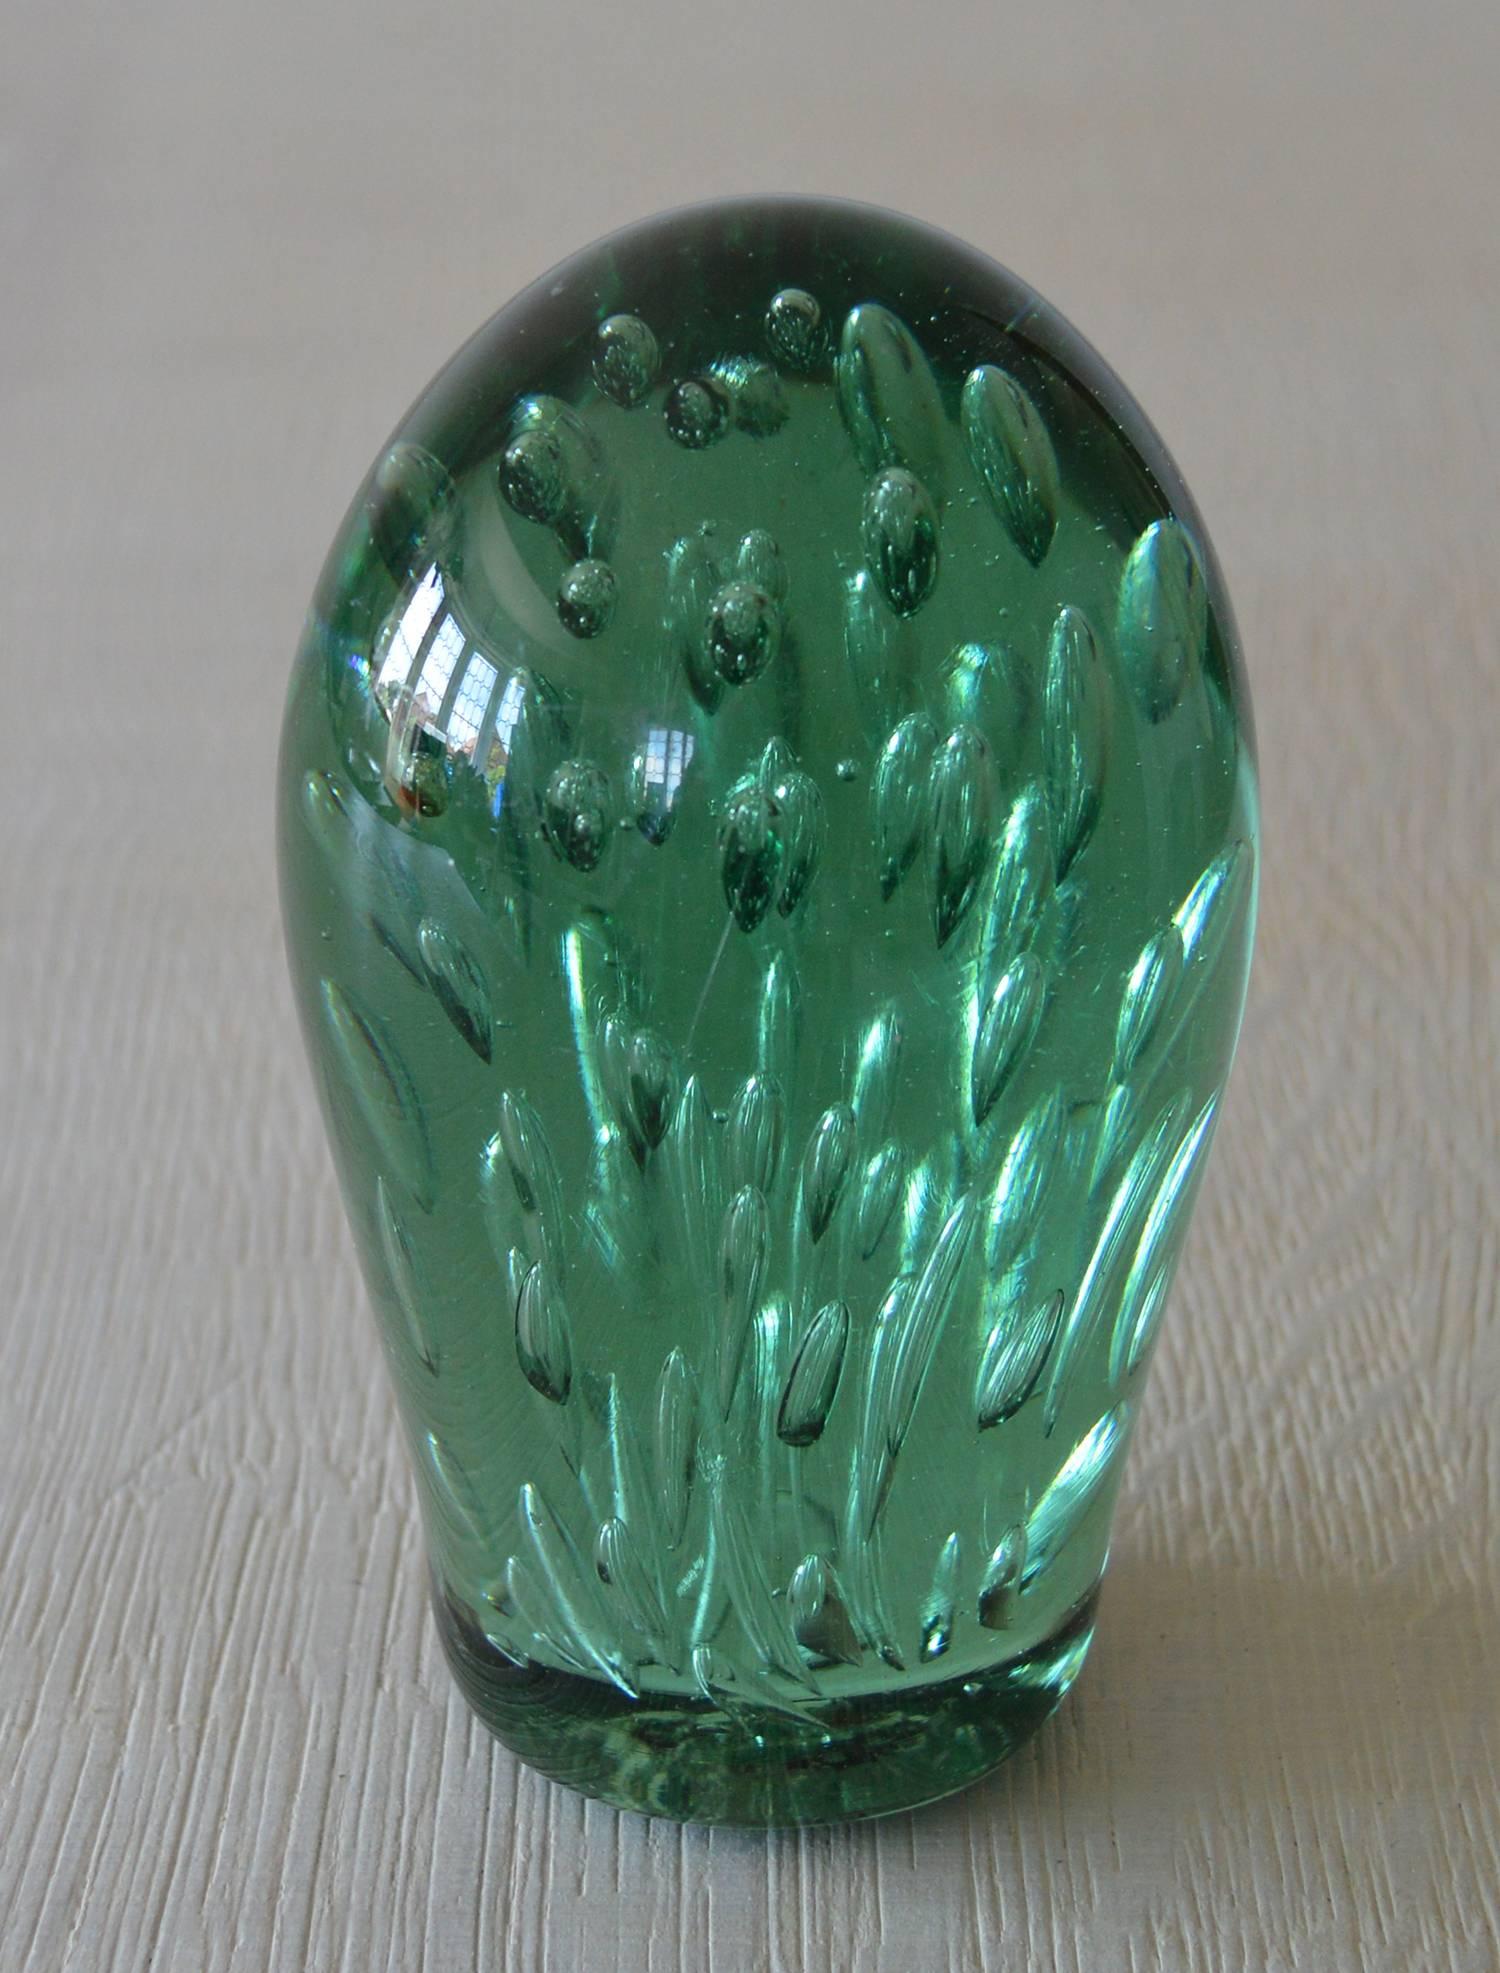 Wonderful piece of green glass with a bubble effect interior.

It can be used as a paperweight, doorstop or simply as a piece of sculpture.